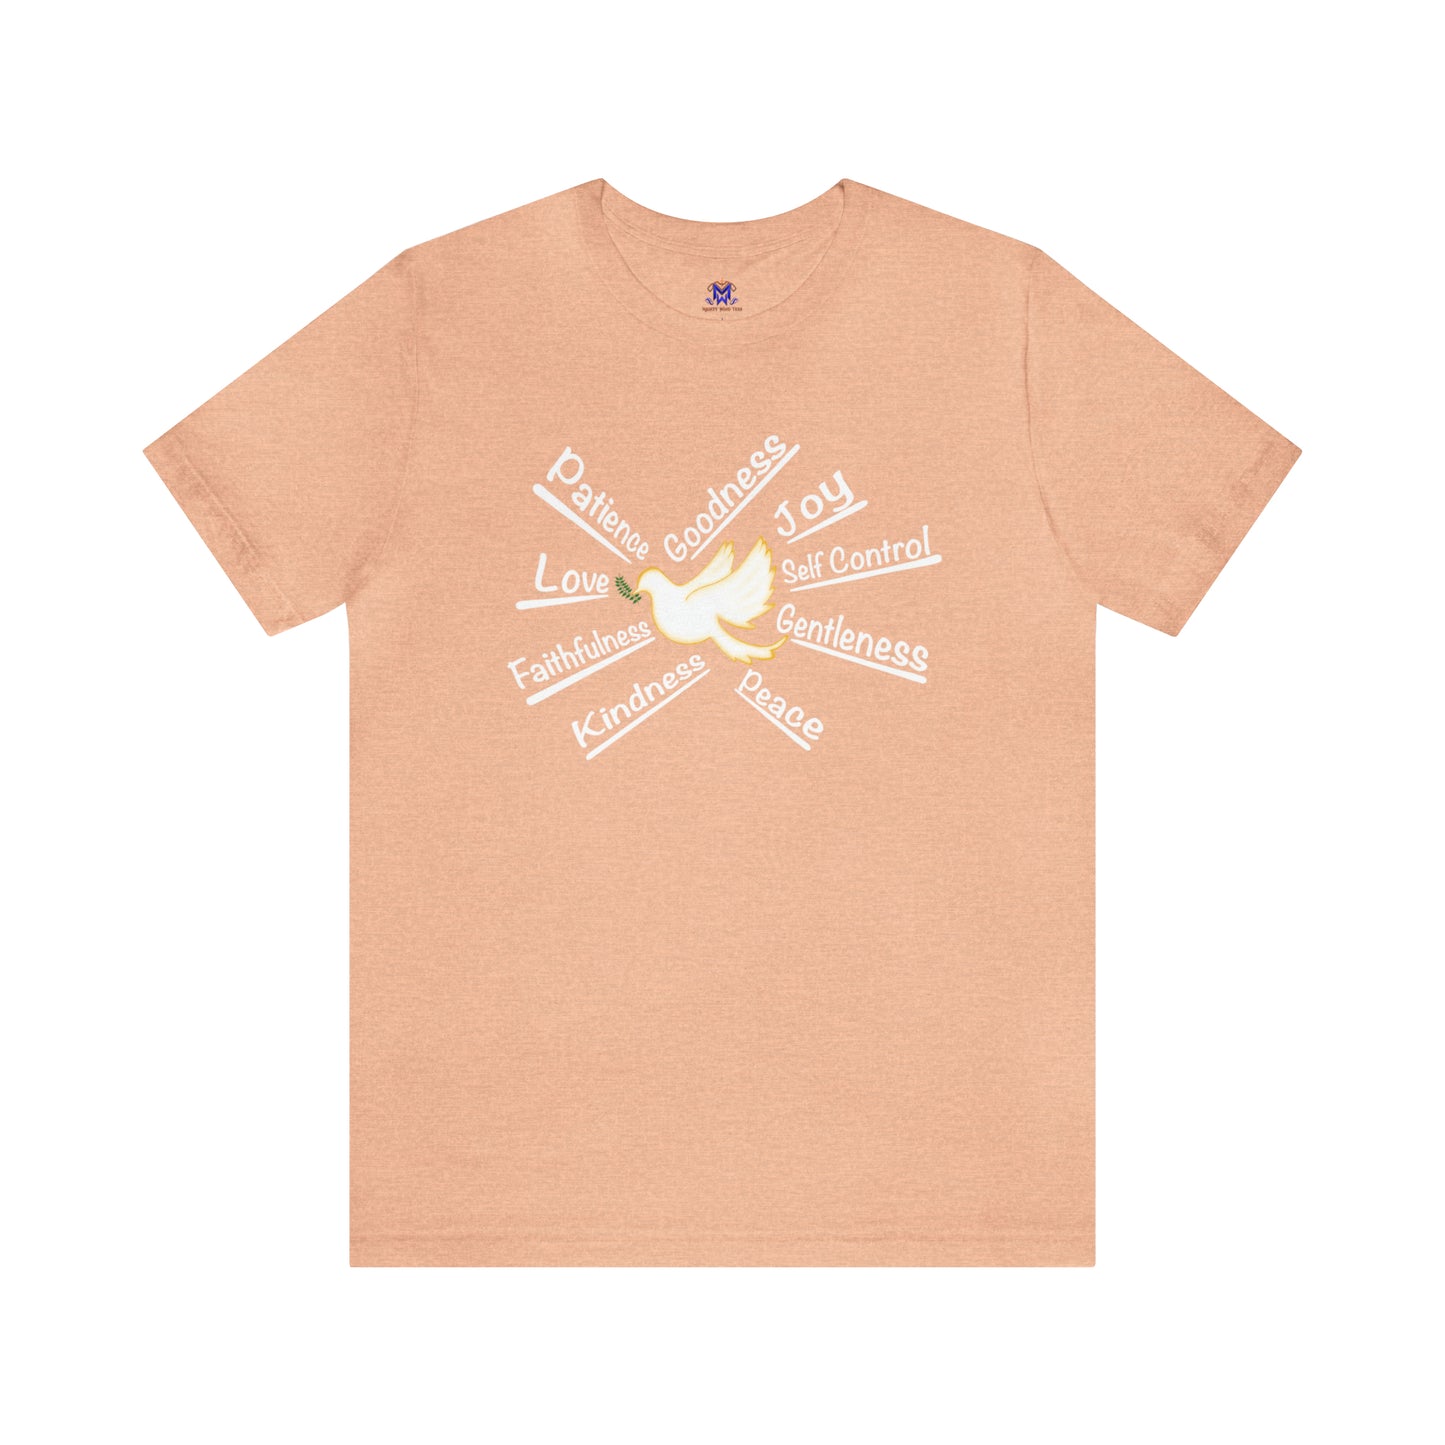 Fruit of the Spirit ( Available in more colors)